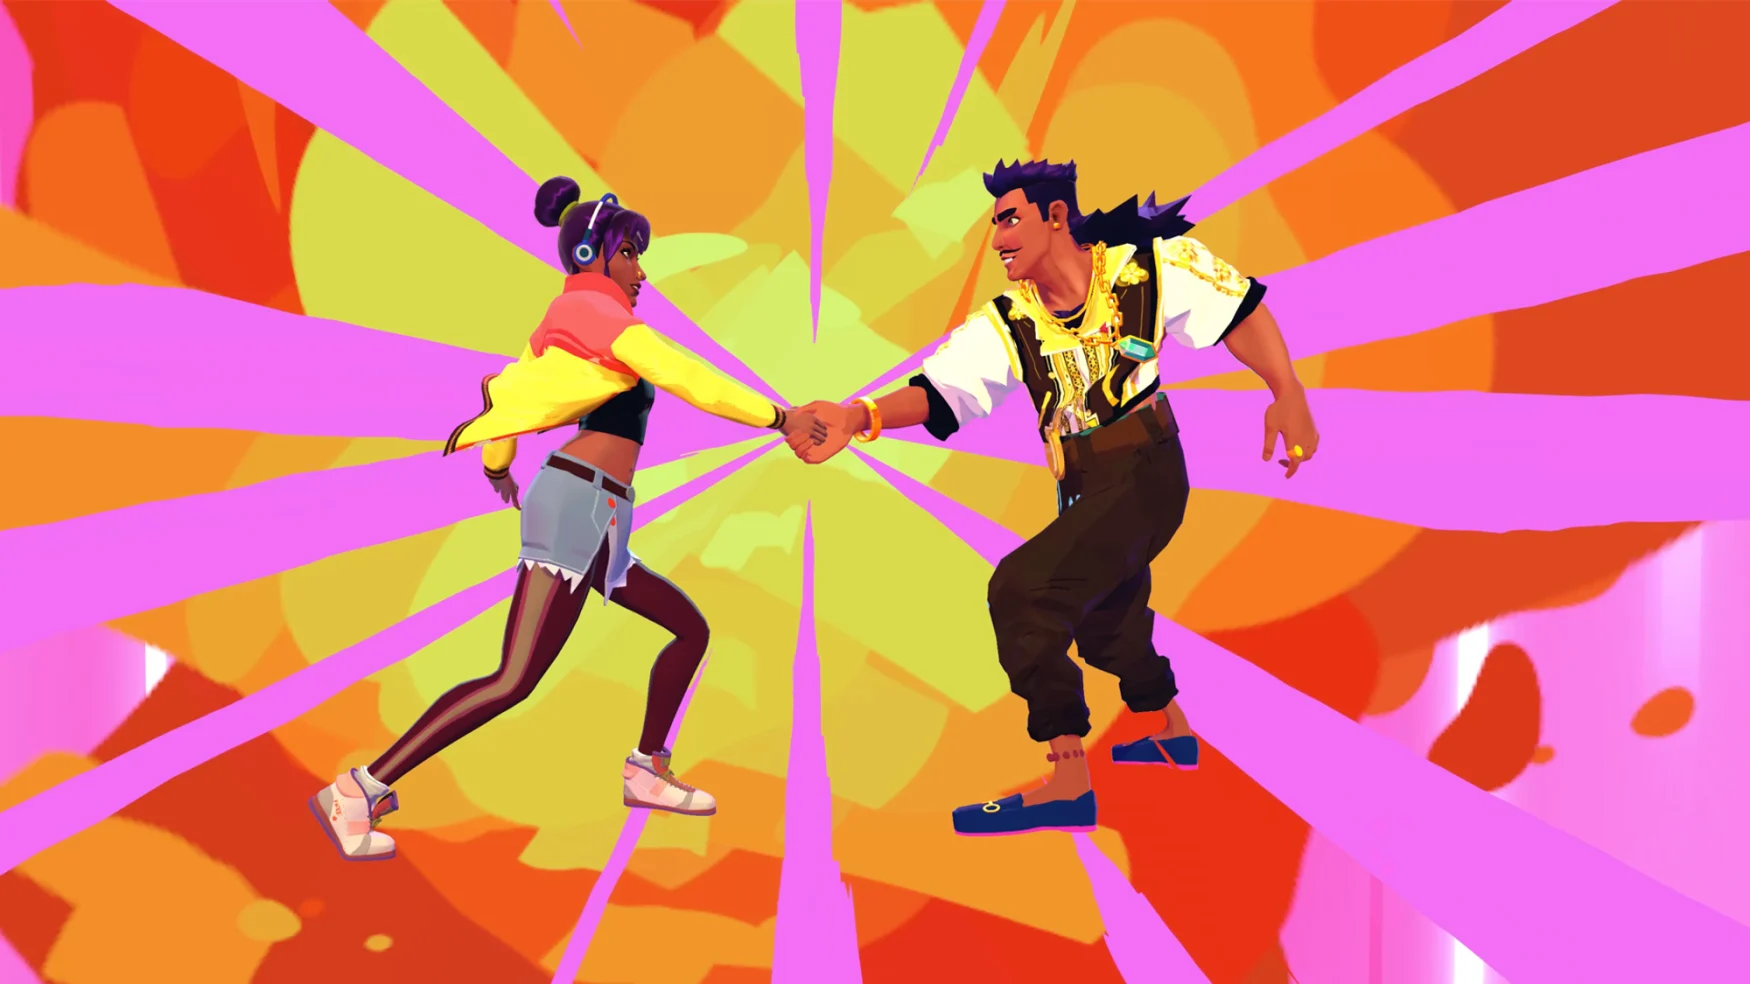 Gameplay still from ‘Thirsty Suitors’ featuring the hero Jala shaking hands with her narcissistic ex-boyfriend Sergio. Purple, yellow and orange patterns explode all around them, celebrating their resolution.